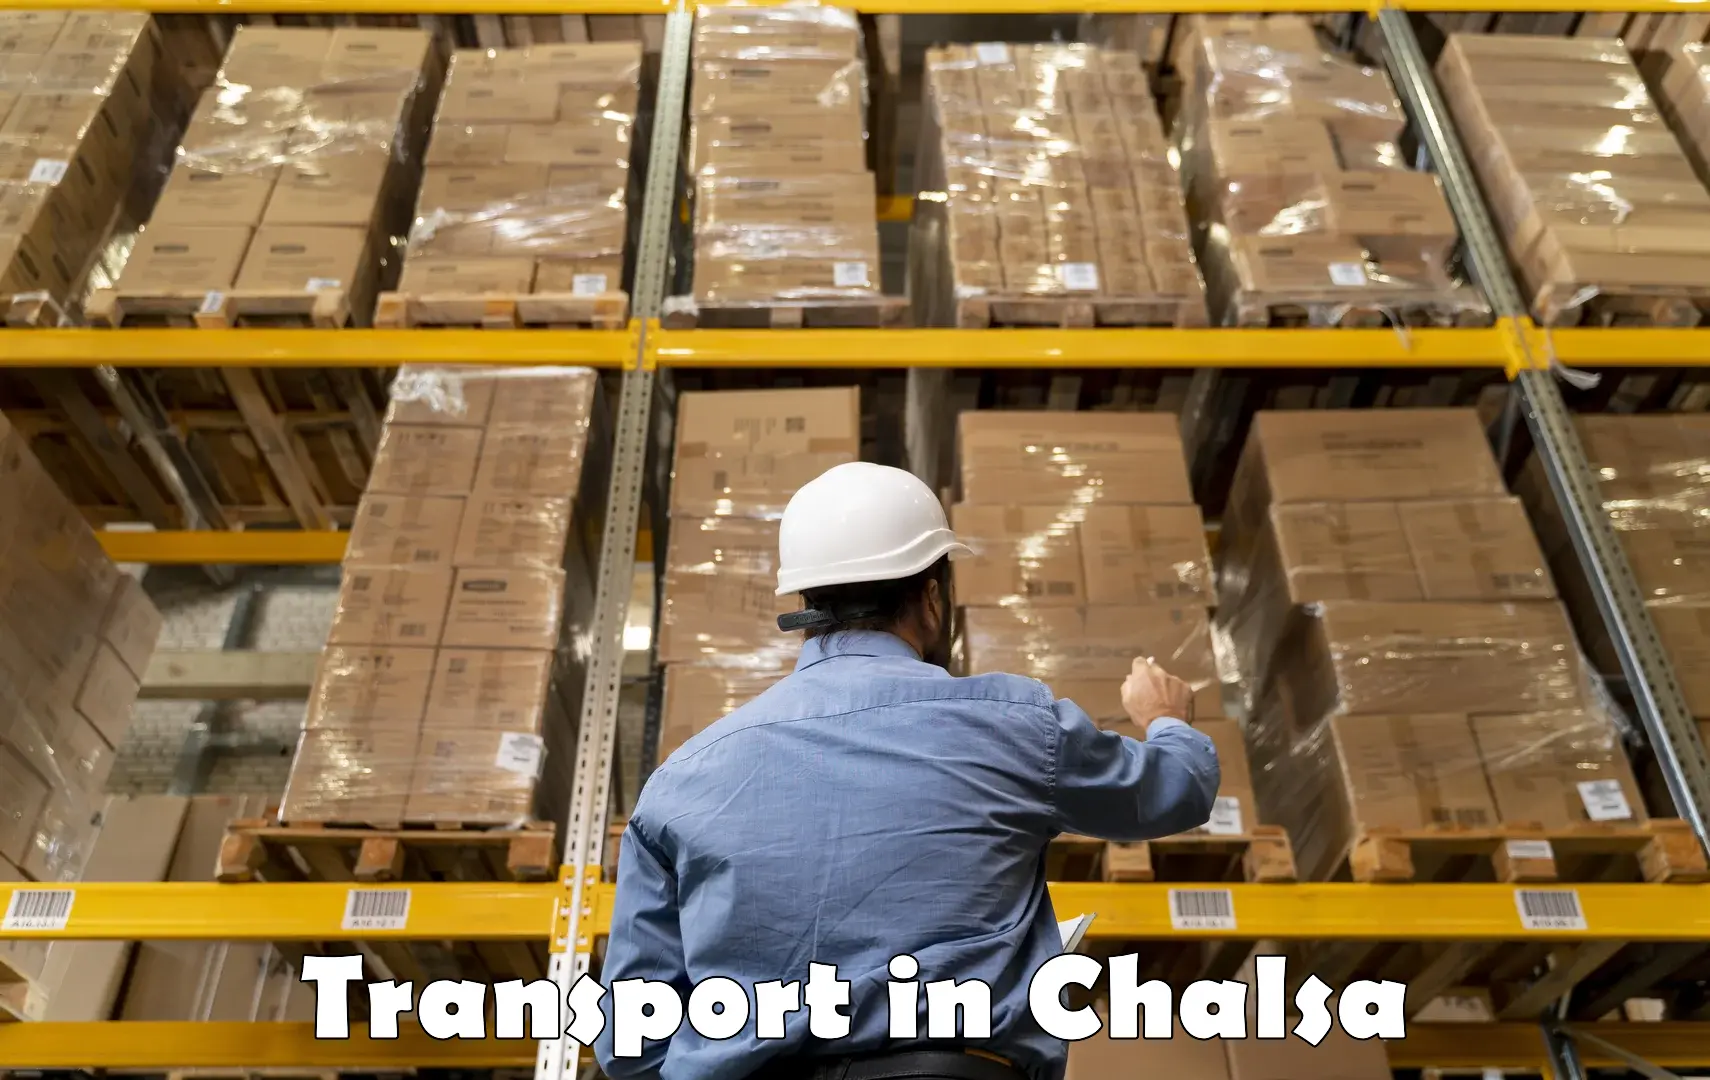 Road transport online services in Chalsa